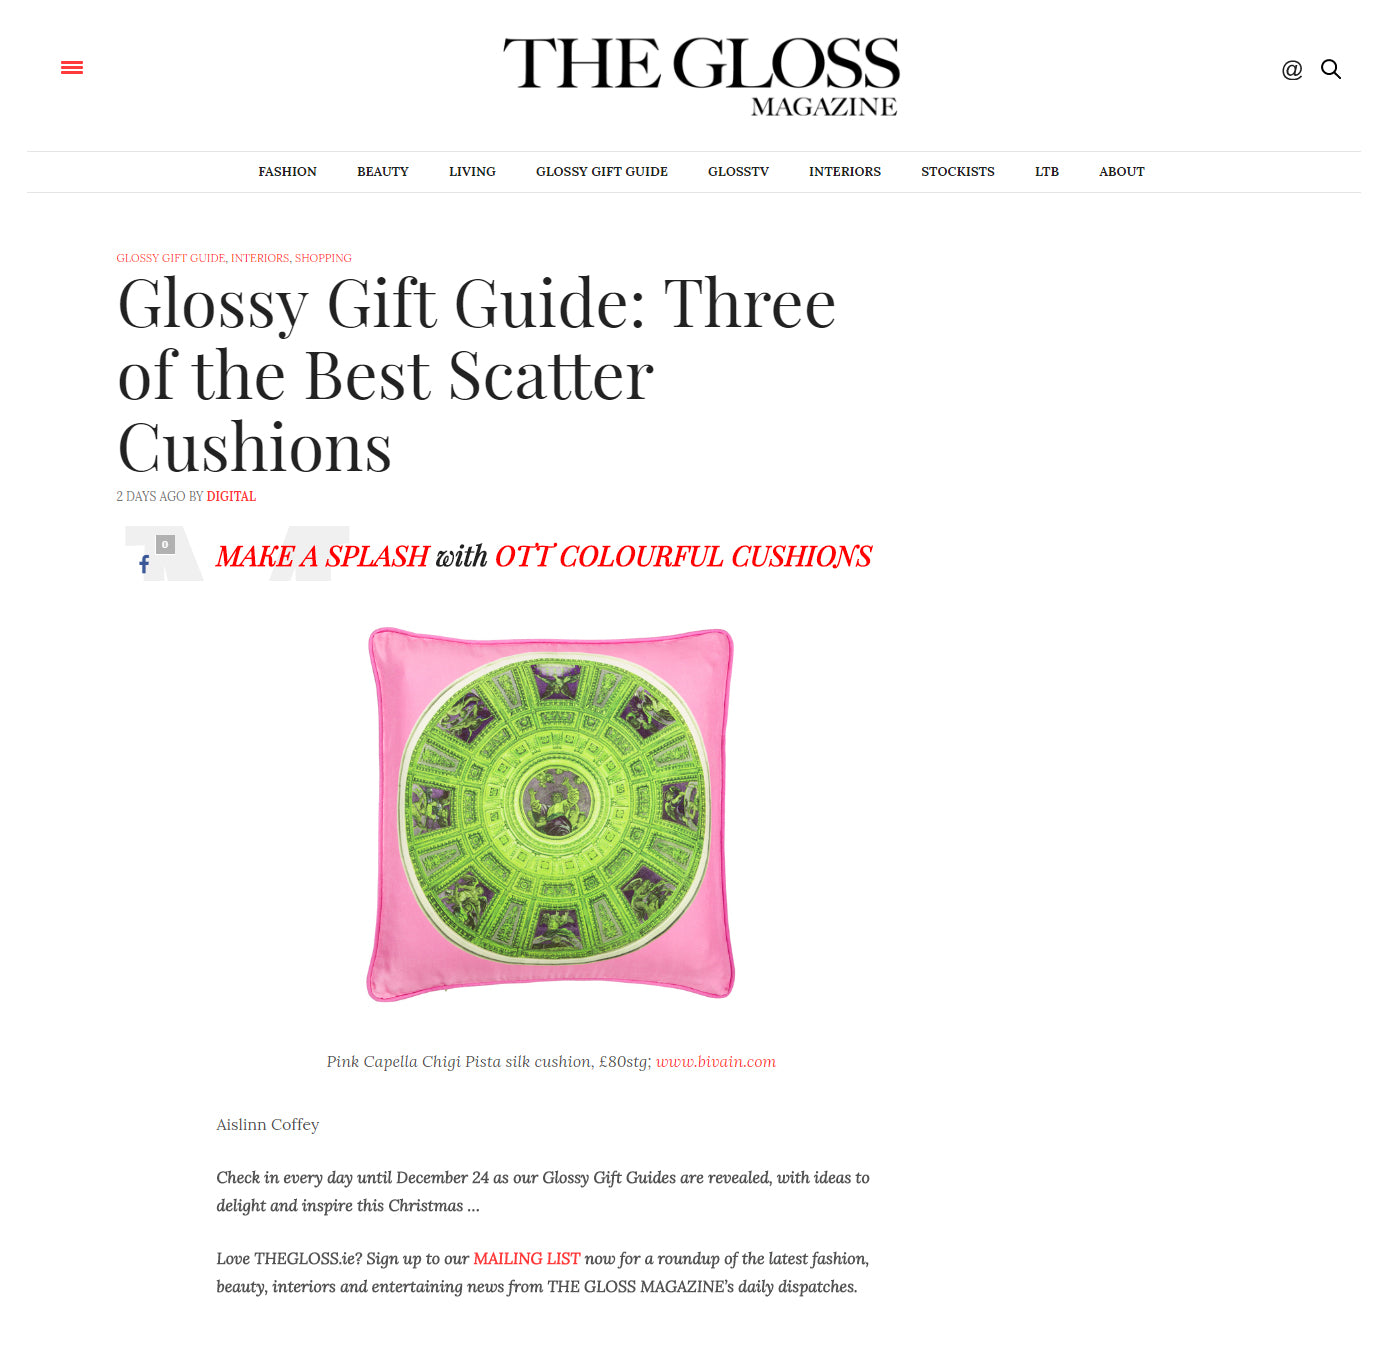 Bivain on thegloss.ie